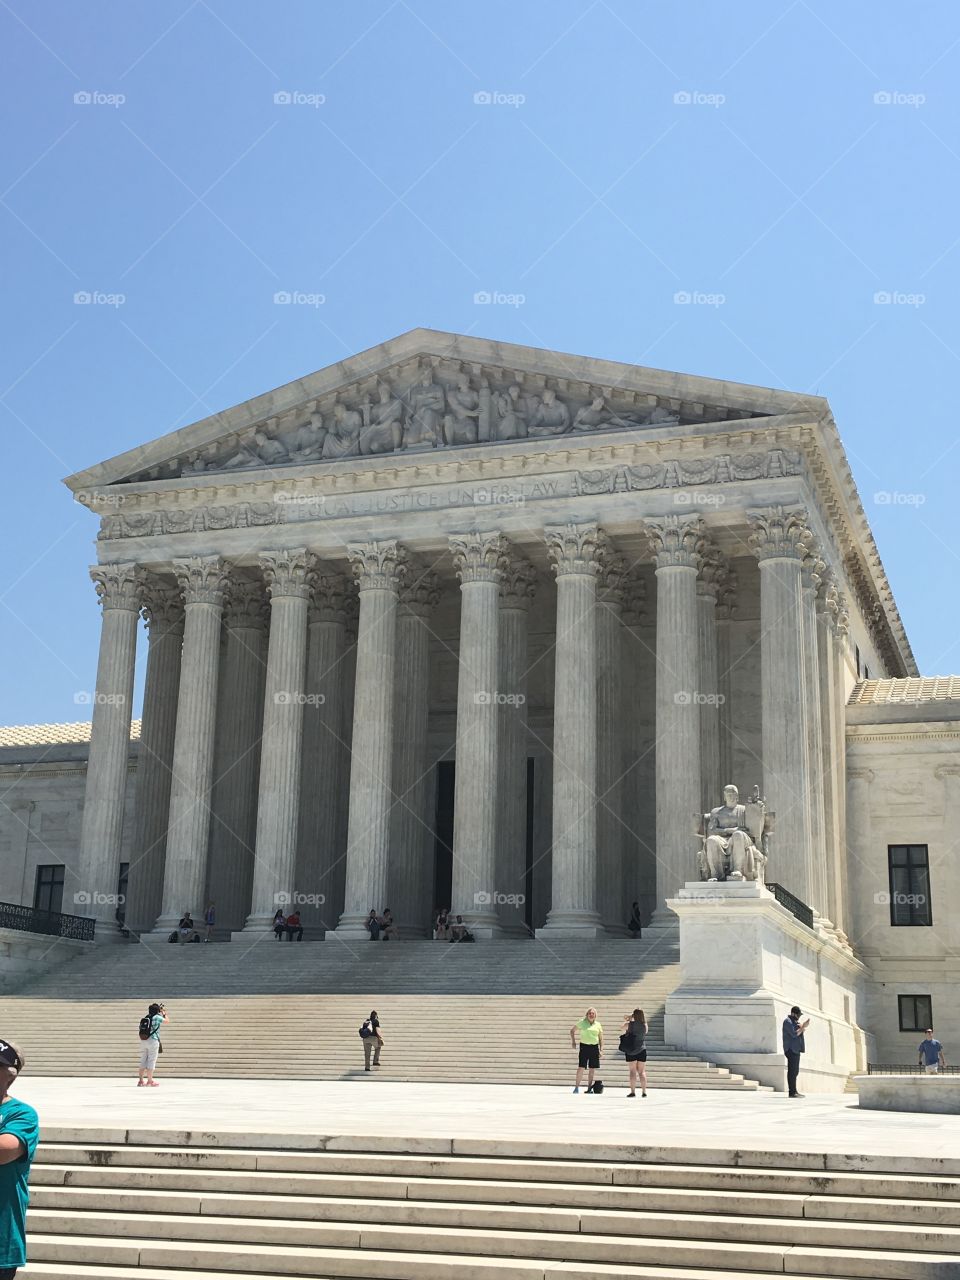 Supreme Court if the United States of America